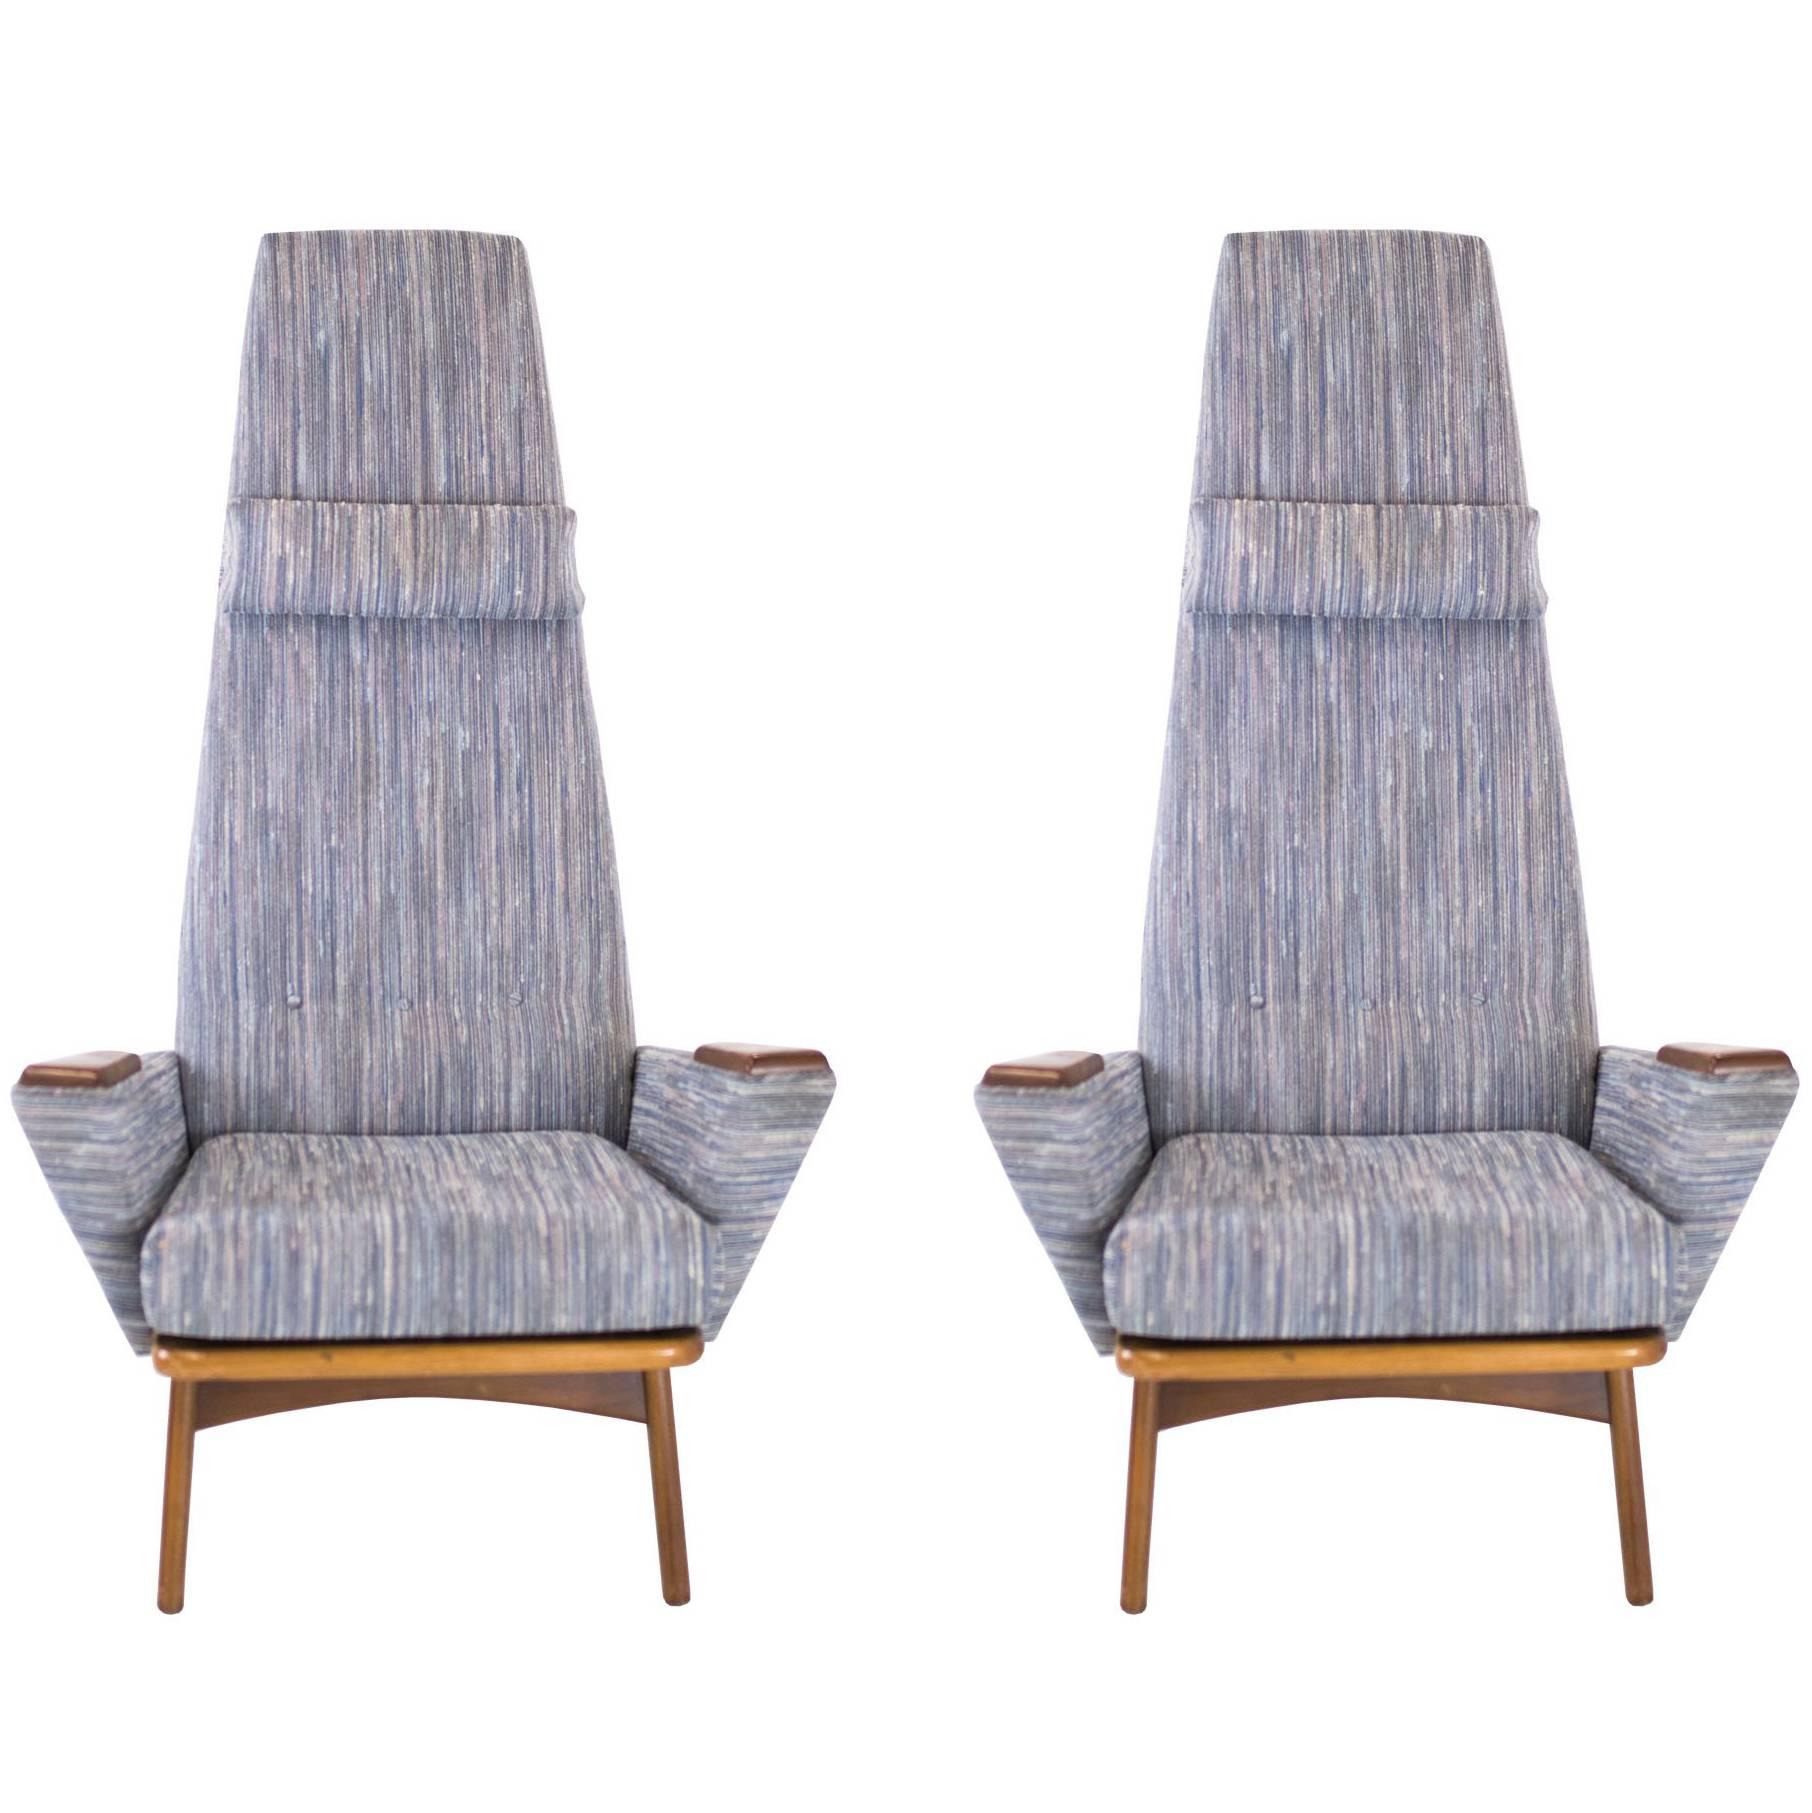 Pair of Slim Jim Lounge Chairs by Adrian Pearsall for Craft Associates